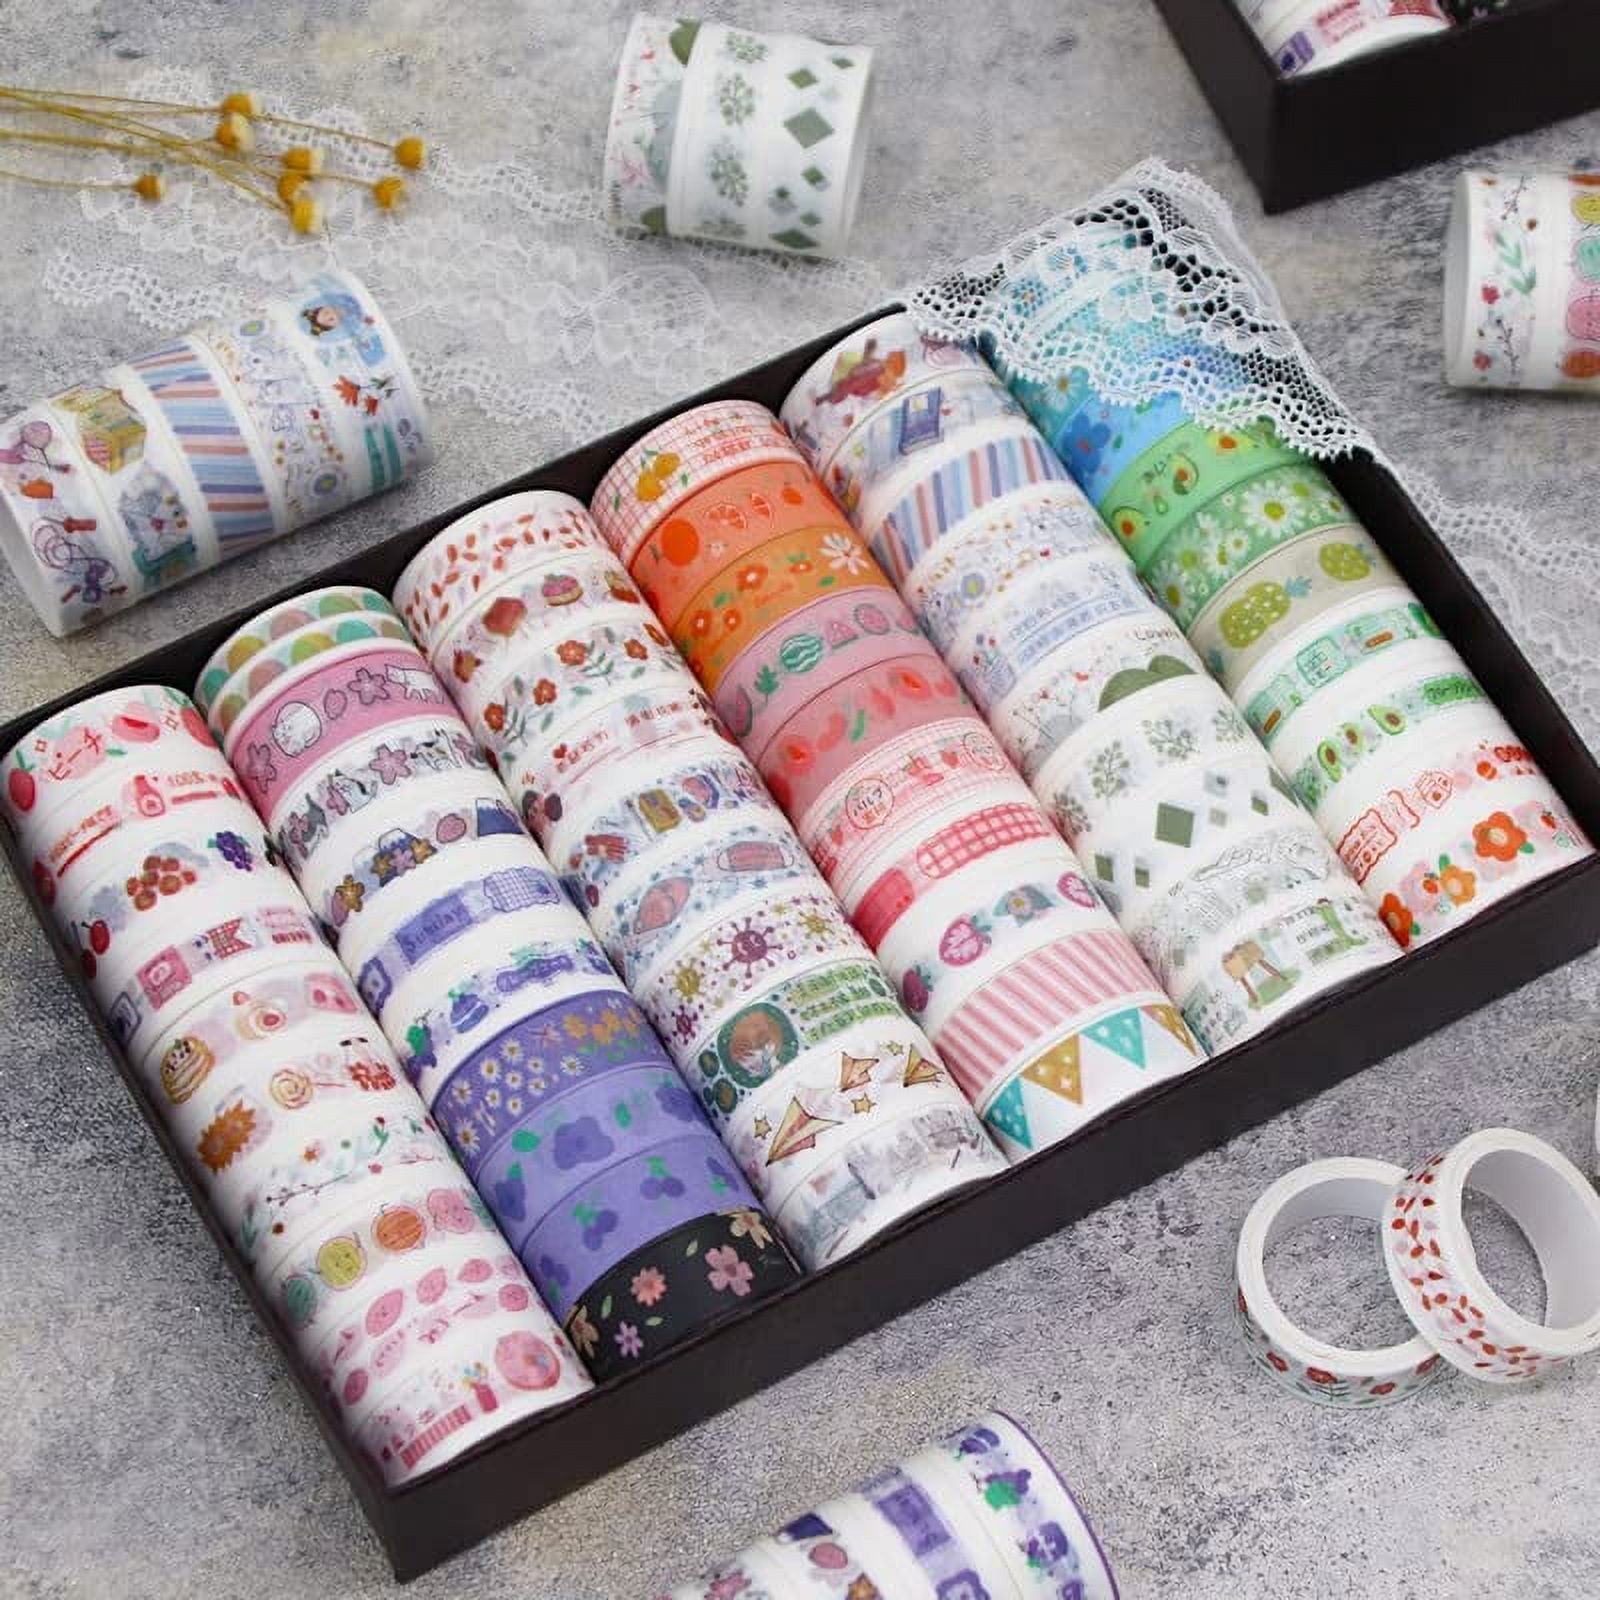 EXCEART 15 Rolls Pocket Tape Gift Scrapbooking Supplies Diary Book Washi  Tape Craft Making Stickers Gadgets for Kids Suit for Kids Washi Tapes Hand